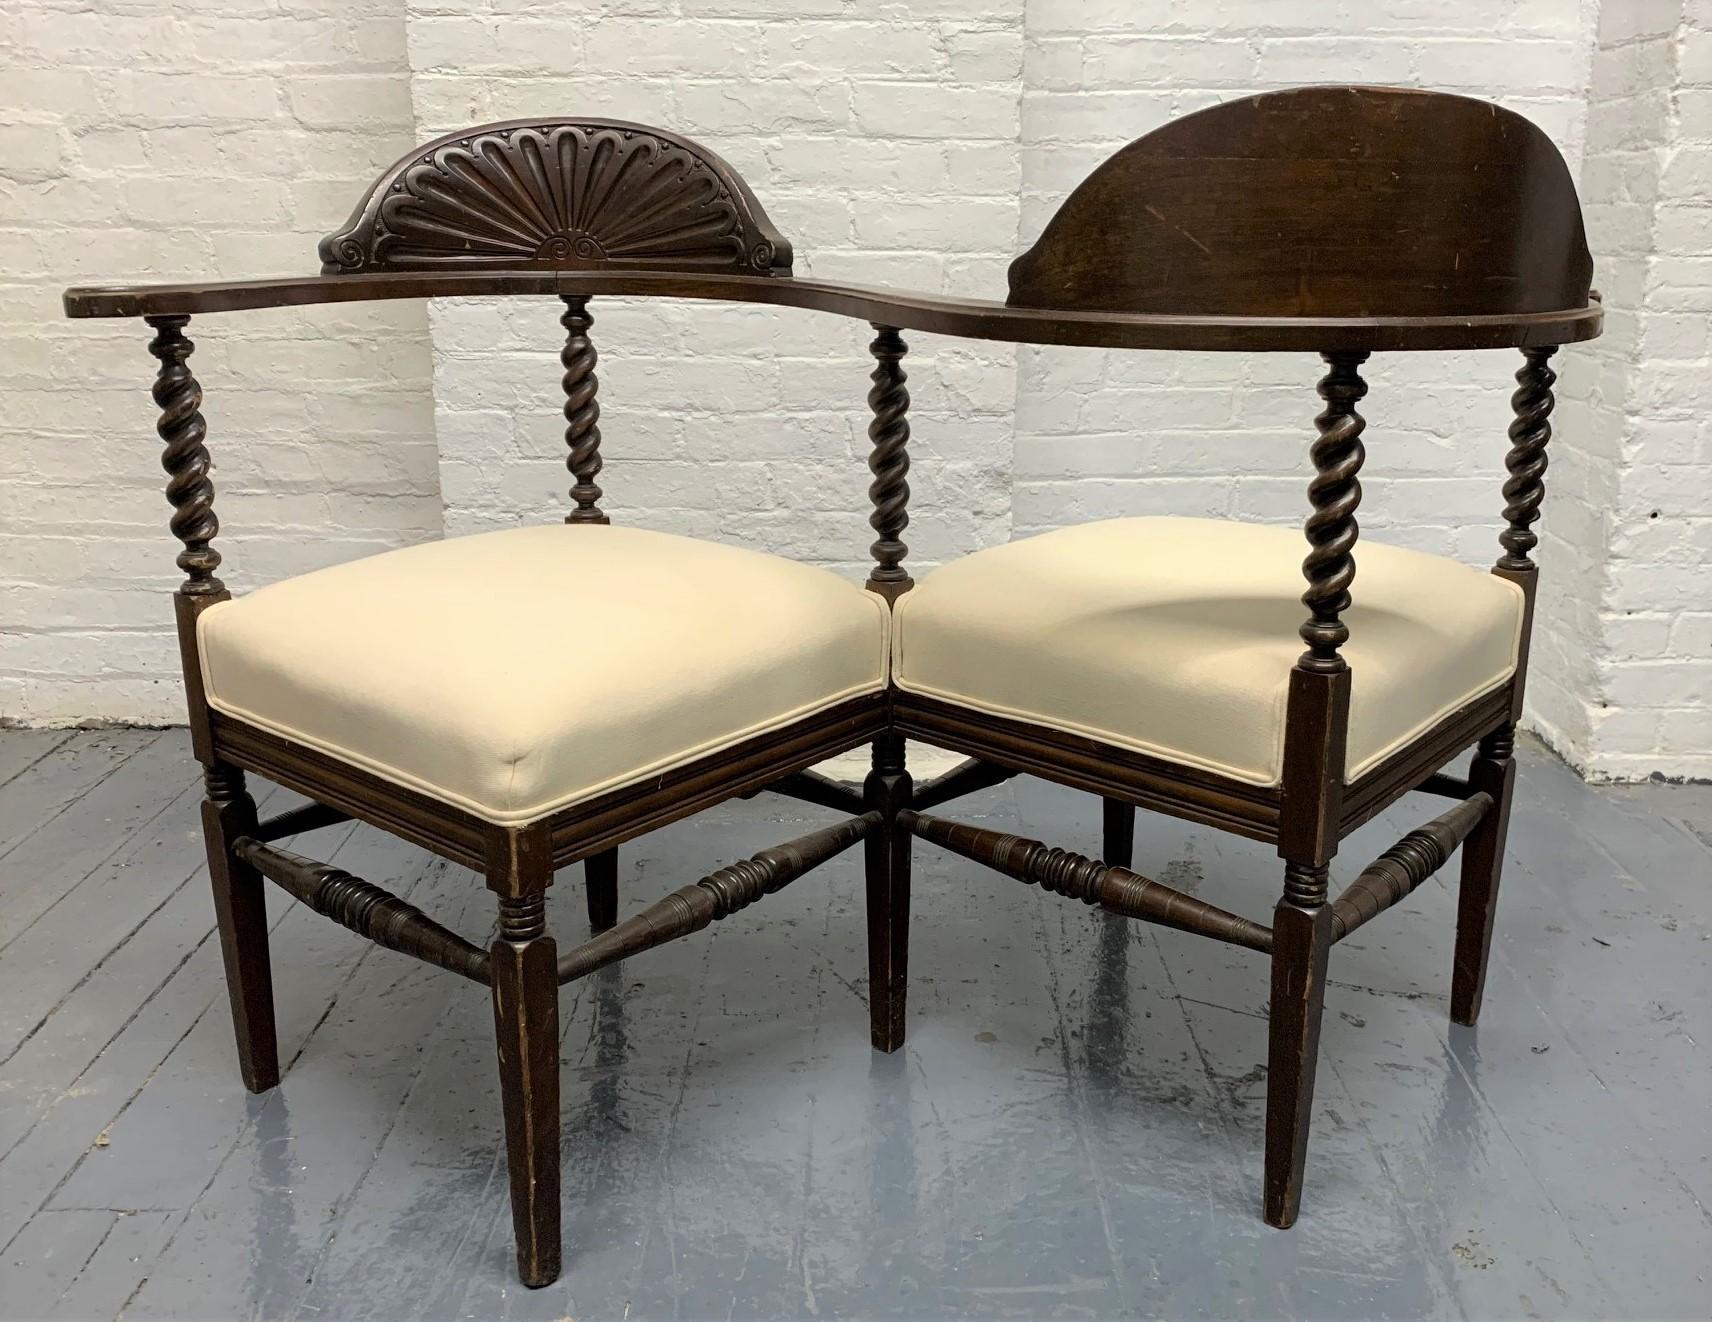 Late 19th century Tete a Tete with carved wood frame and an upholstered, linen-blend, cushioned seats.